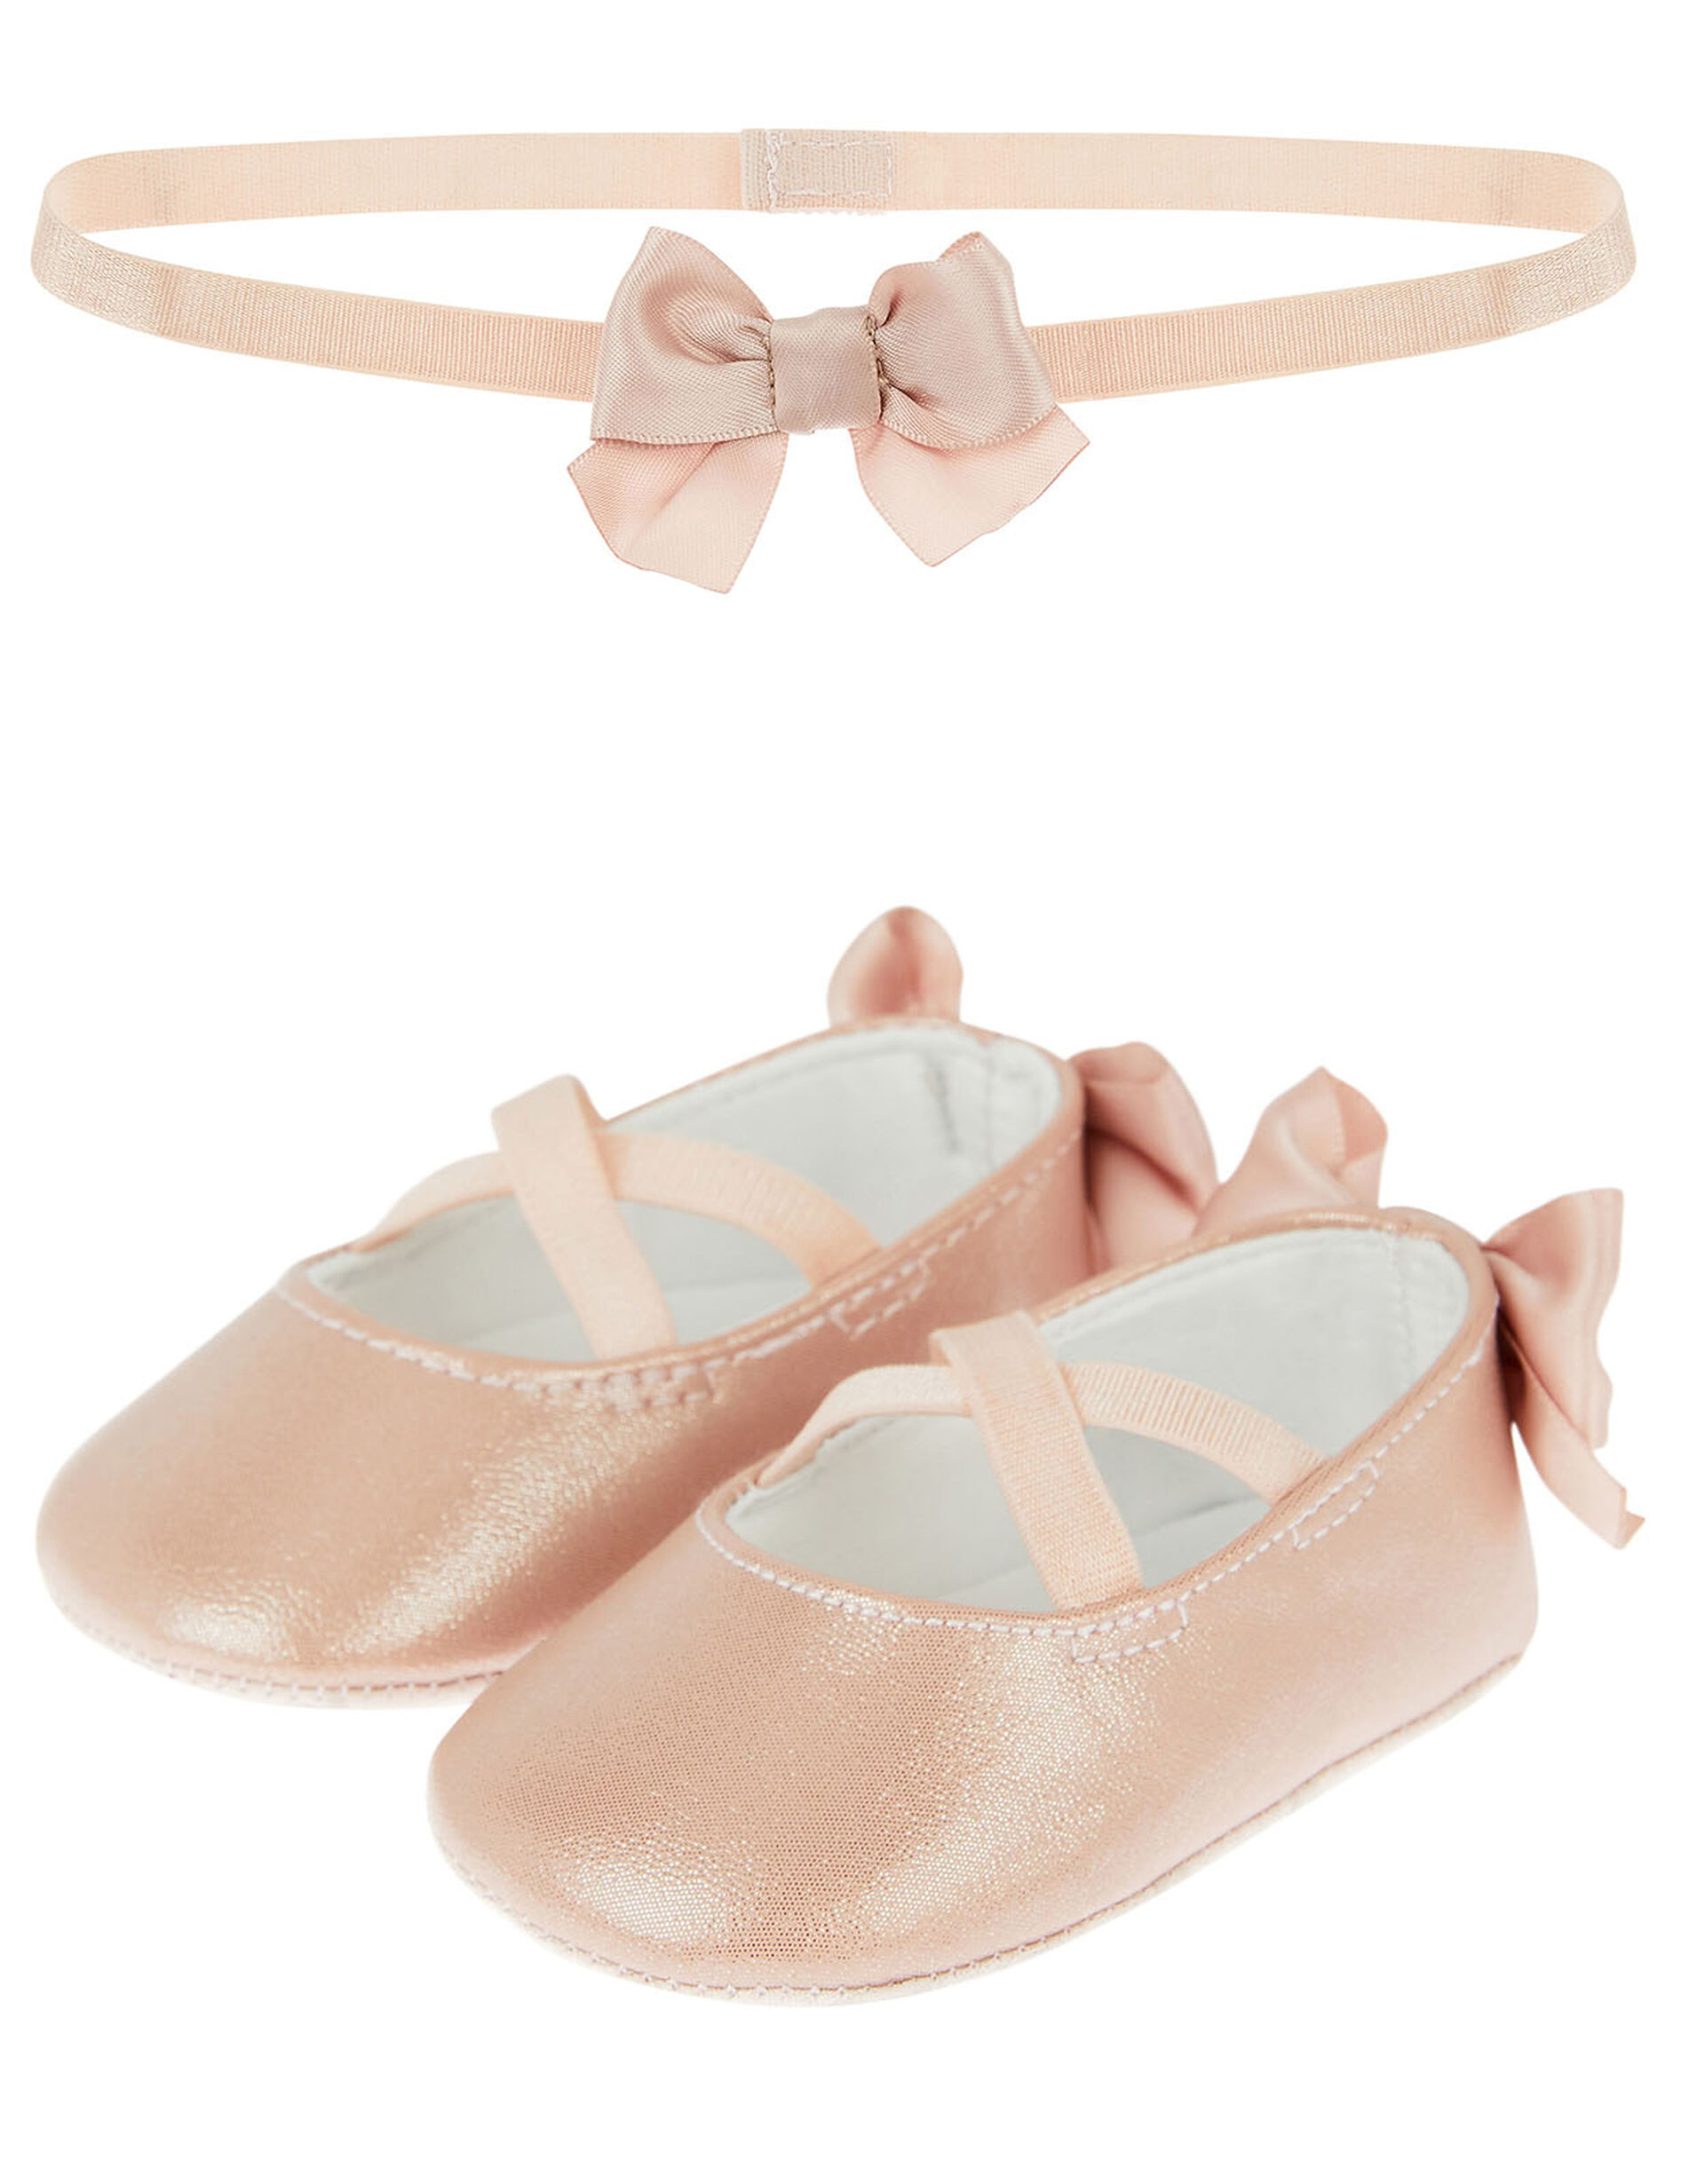 Baby Valerie Booties and Bando Set , Pink (PINK), large